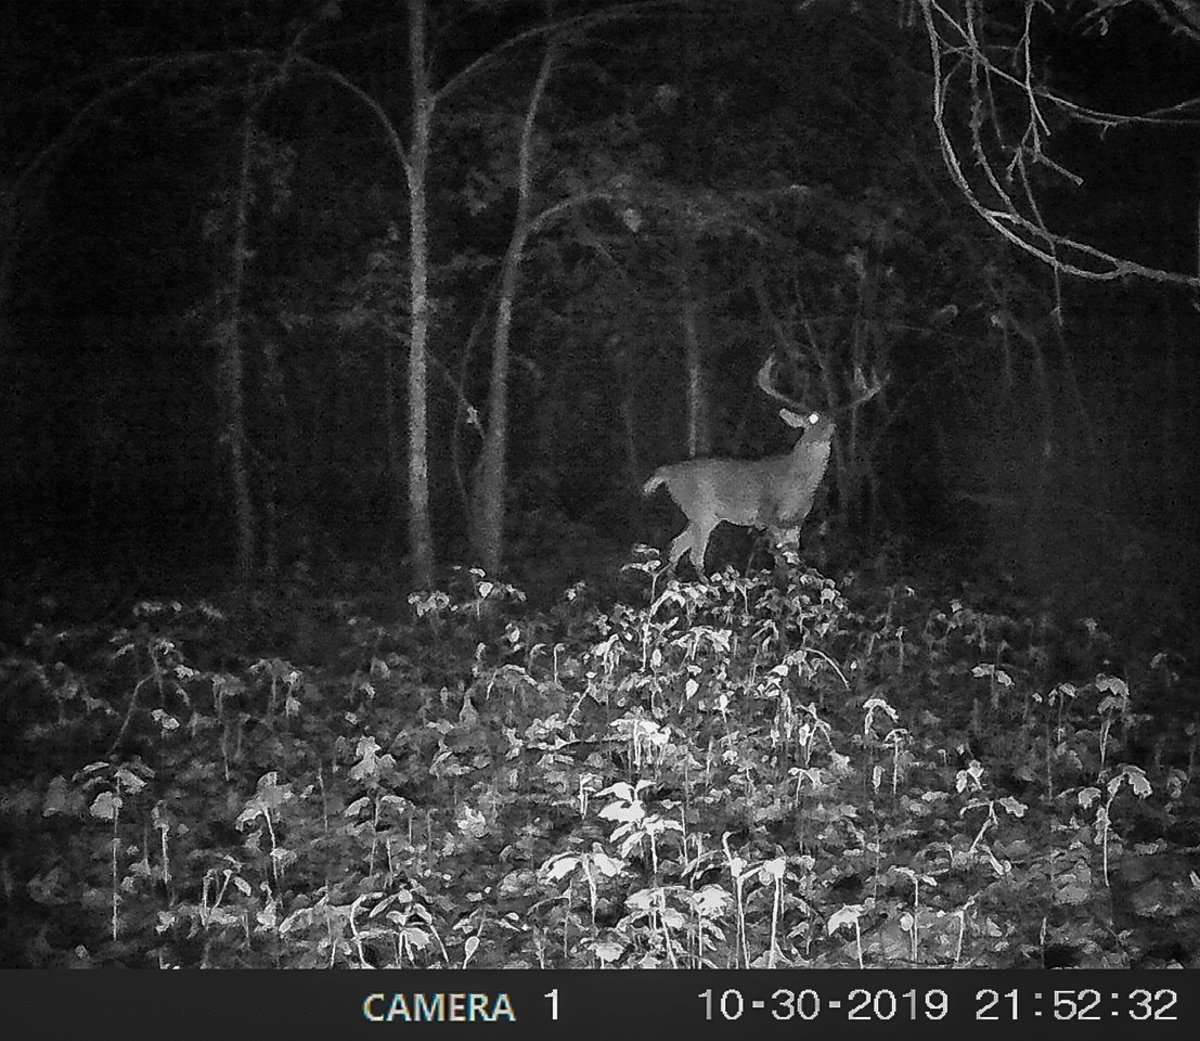 A boat and a trail camera played big roles in the hunt for this buck. (Preston Hall photo)